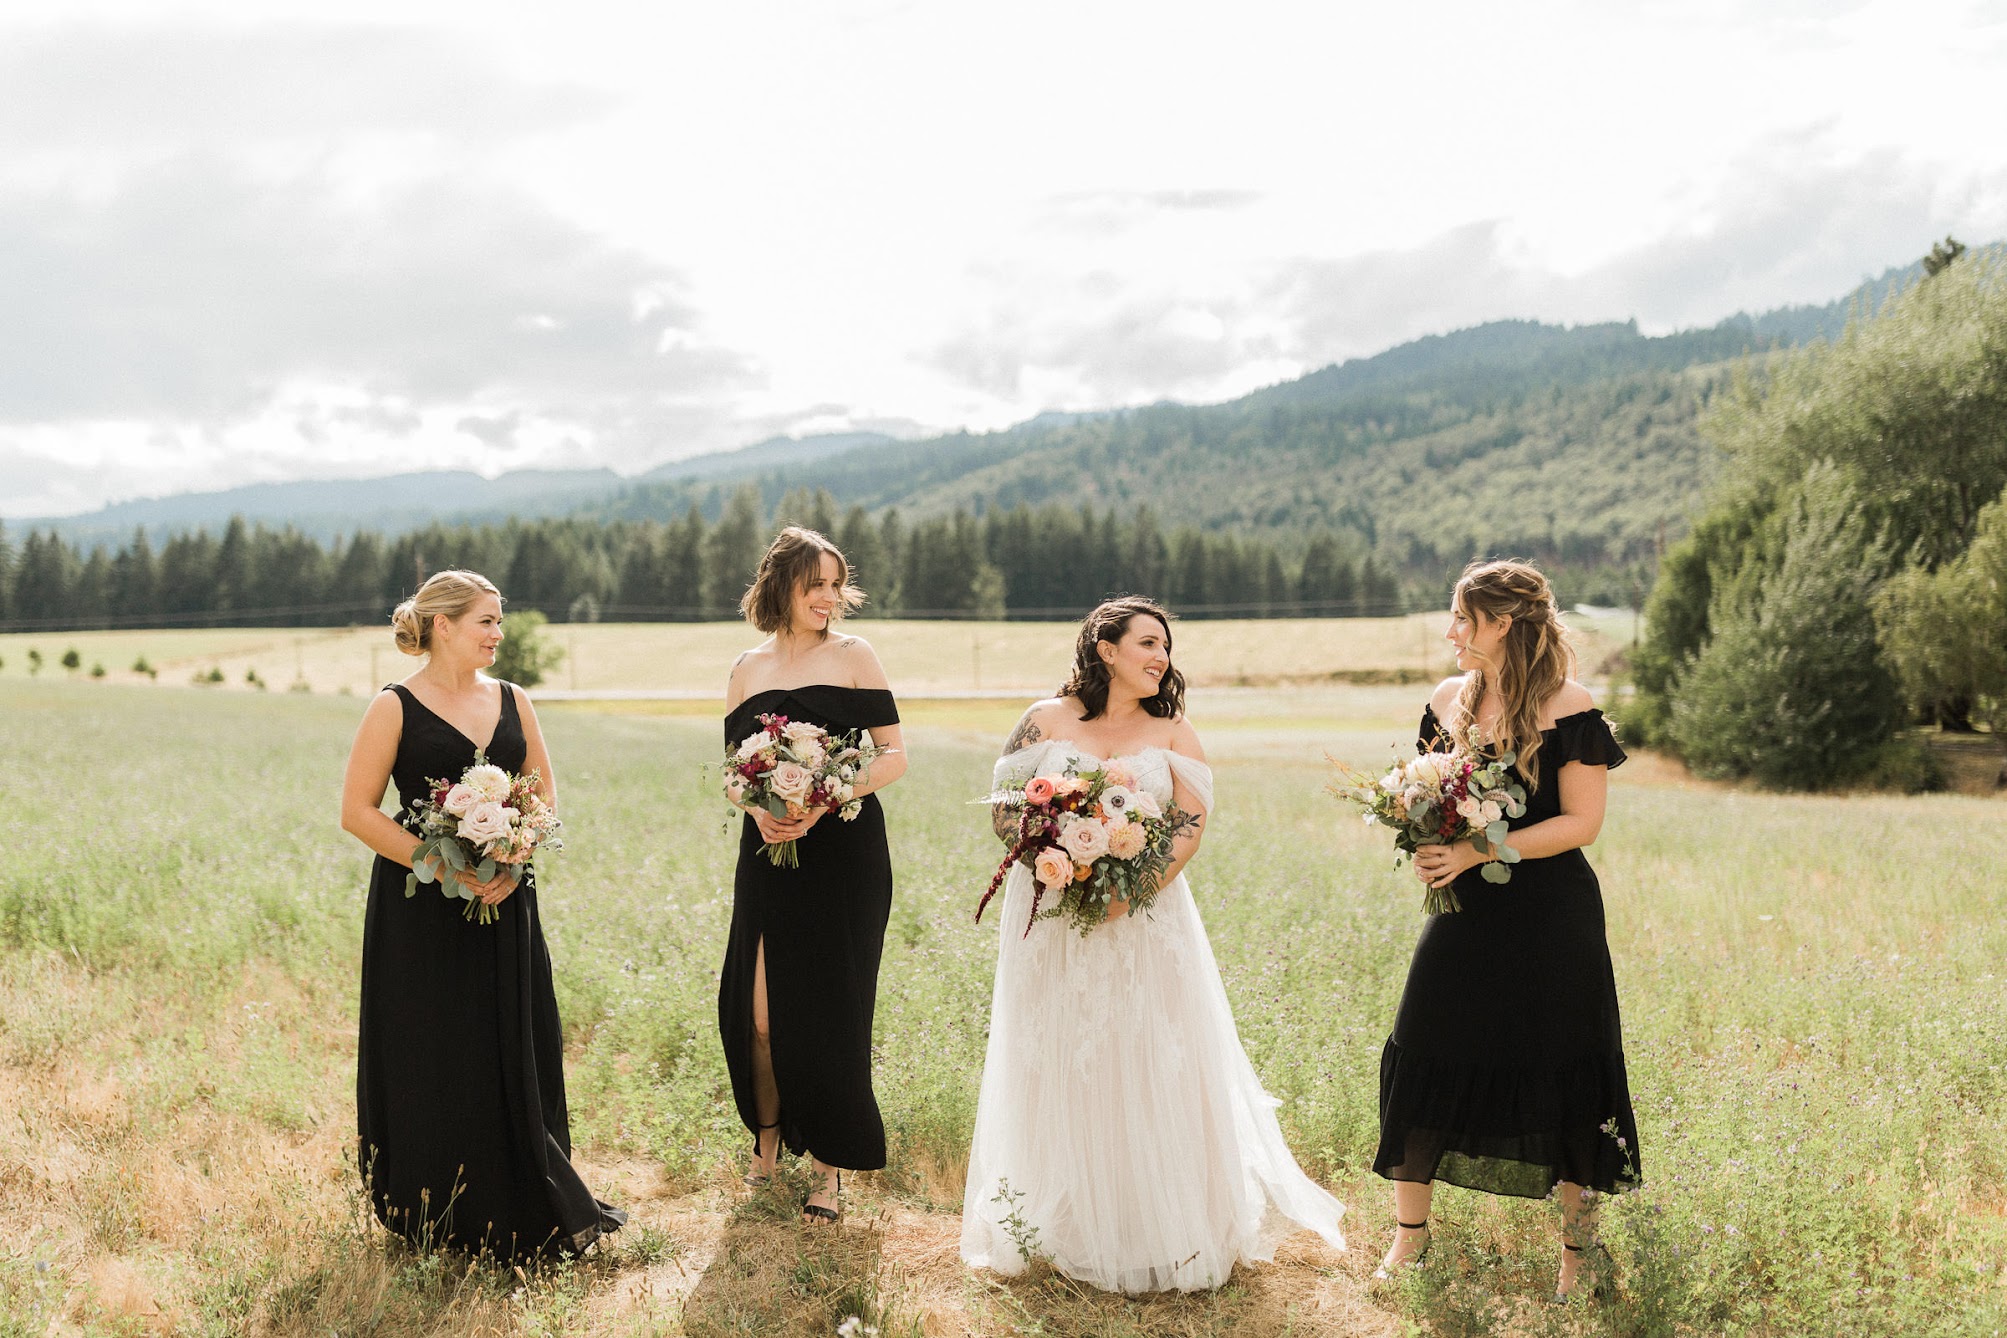 The bride and her three bridesmaids standing apart in a grassy field looking at each other smiling.  